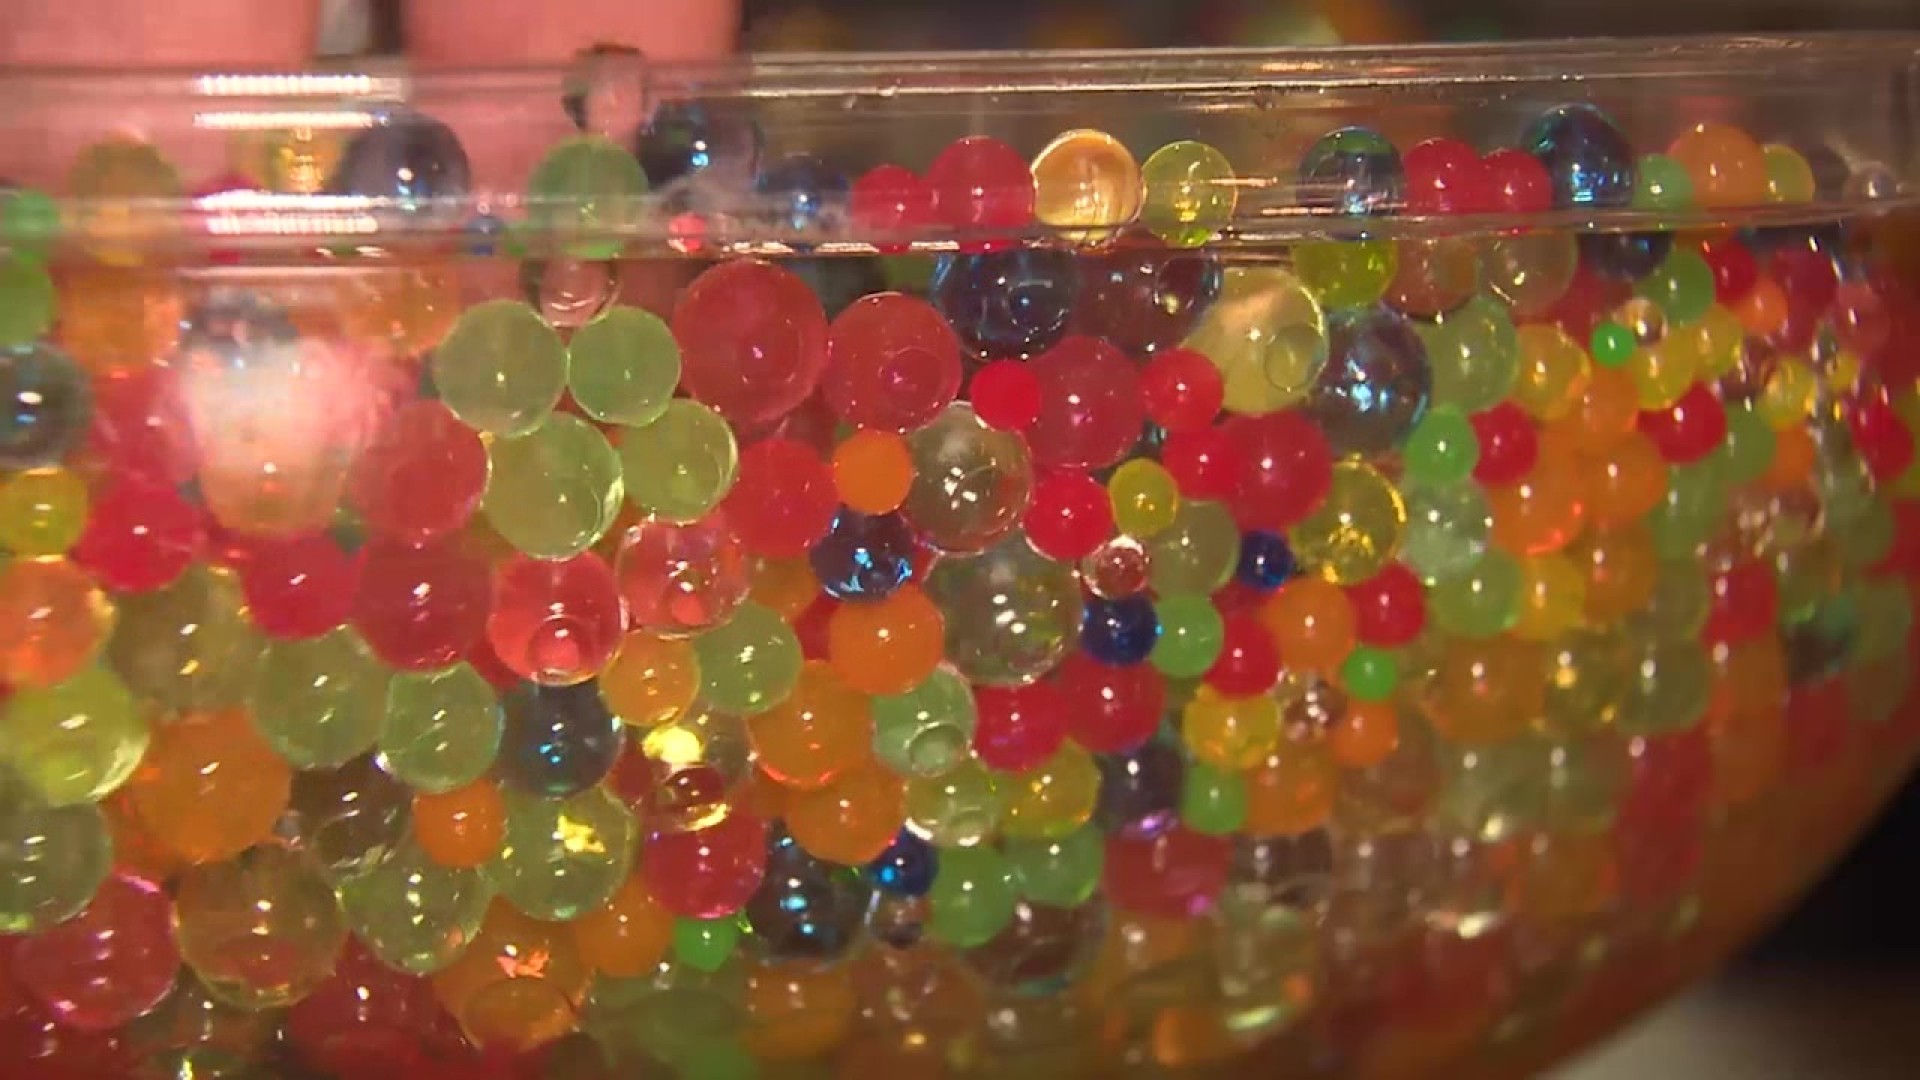 Water beads may pose a life-threatening danger to children: Health